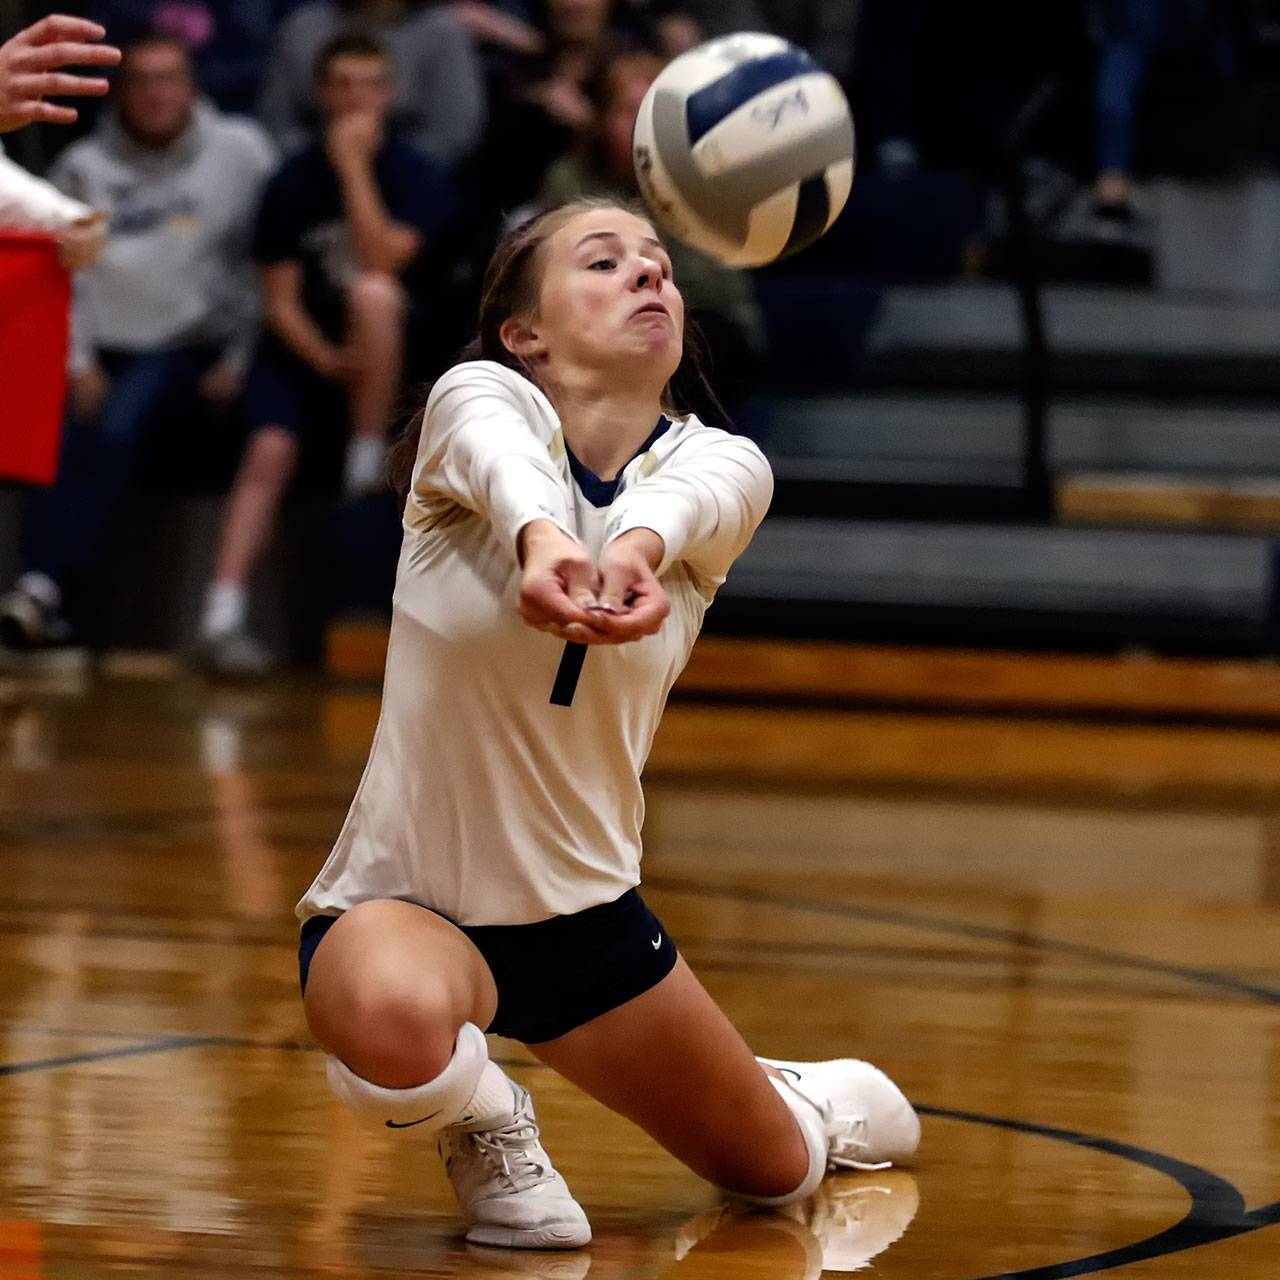 Arlington’s Taylor Helle digs a ball during a Wesco 3A/2A match against Oak Harbor on Oct. 24 at Arlington High School. Helle and the Eagles will play the winner of Thursday’s play-in match between Lynnwood and Squalicum in the 3A Northwest District Tournament next Tuesday at 7 p.m. in Arlington. (Kevin Clark / The Herald)